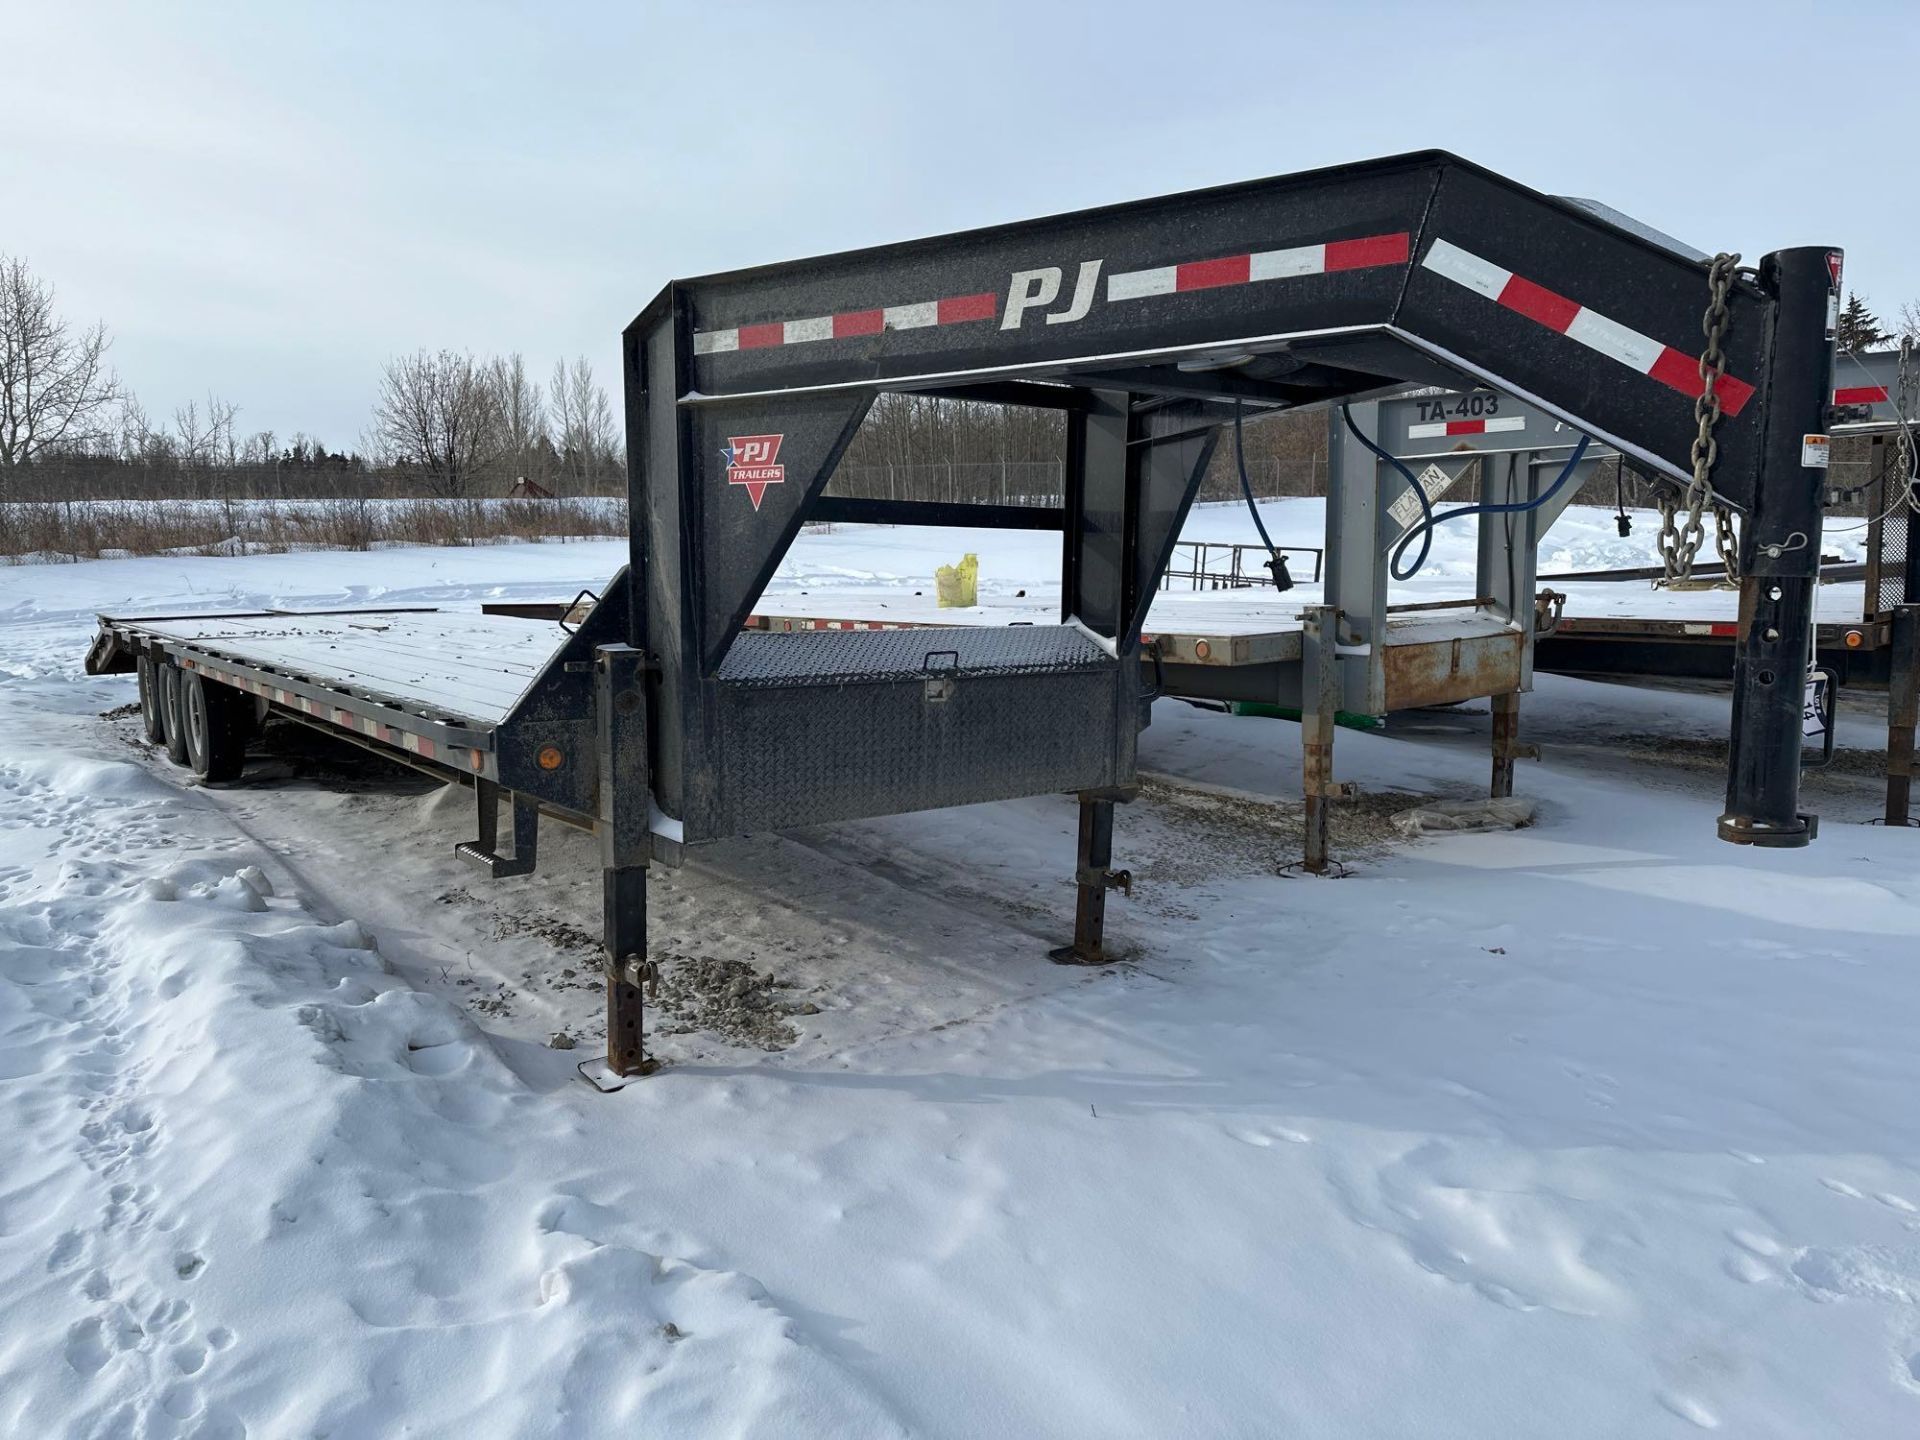 2021 PJ Trailer 32' Tri/A Gooseneck Trailer w. Beaver tails and ramps SN: 4P5LS3232L1314737 - Image 2 of 10